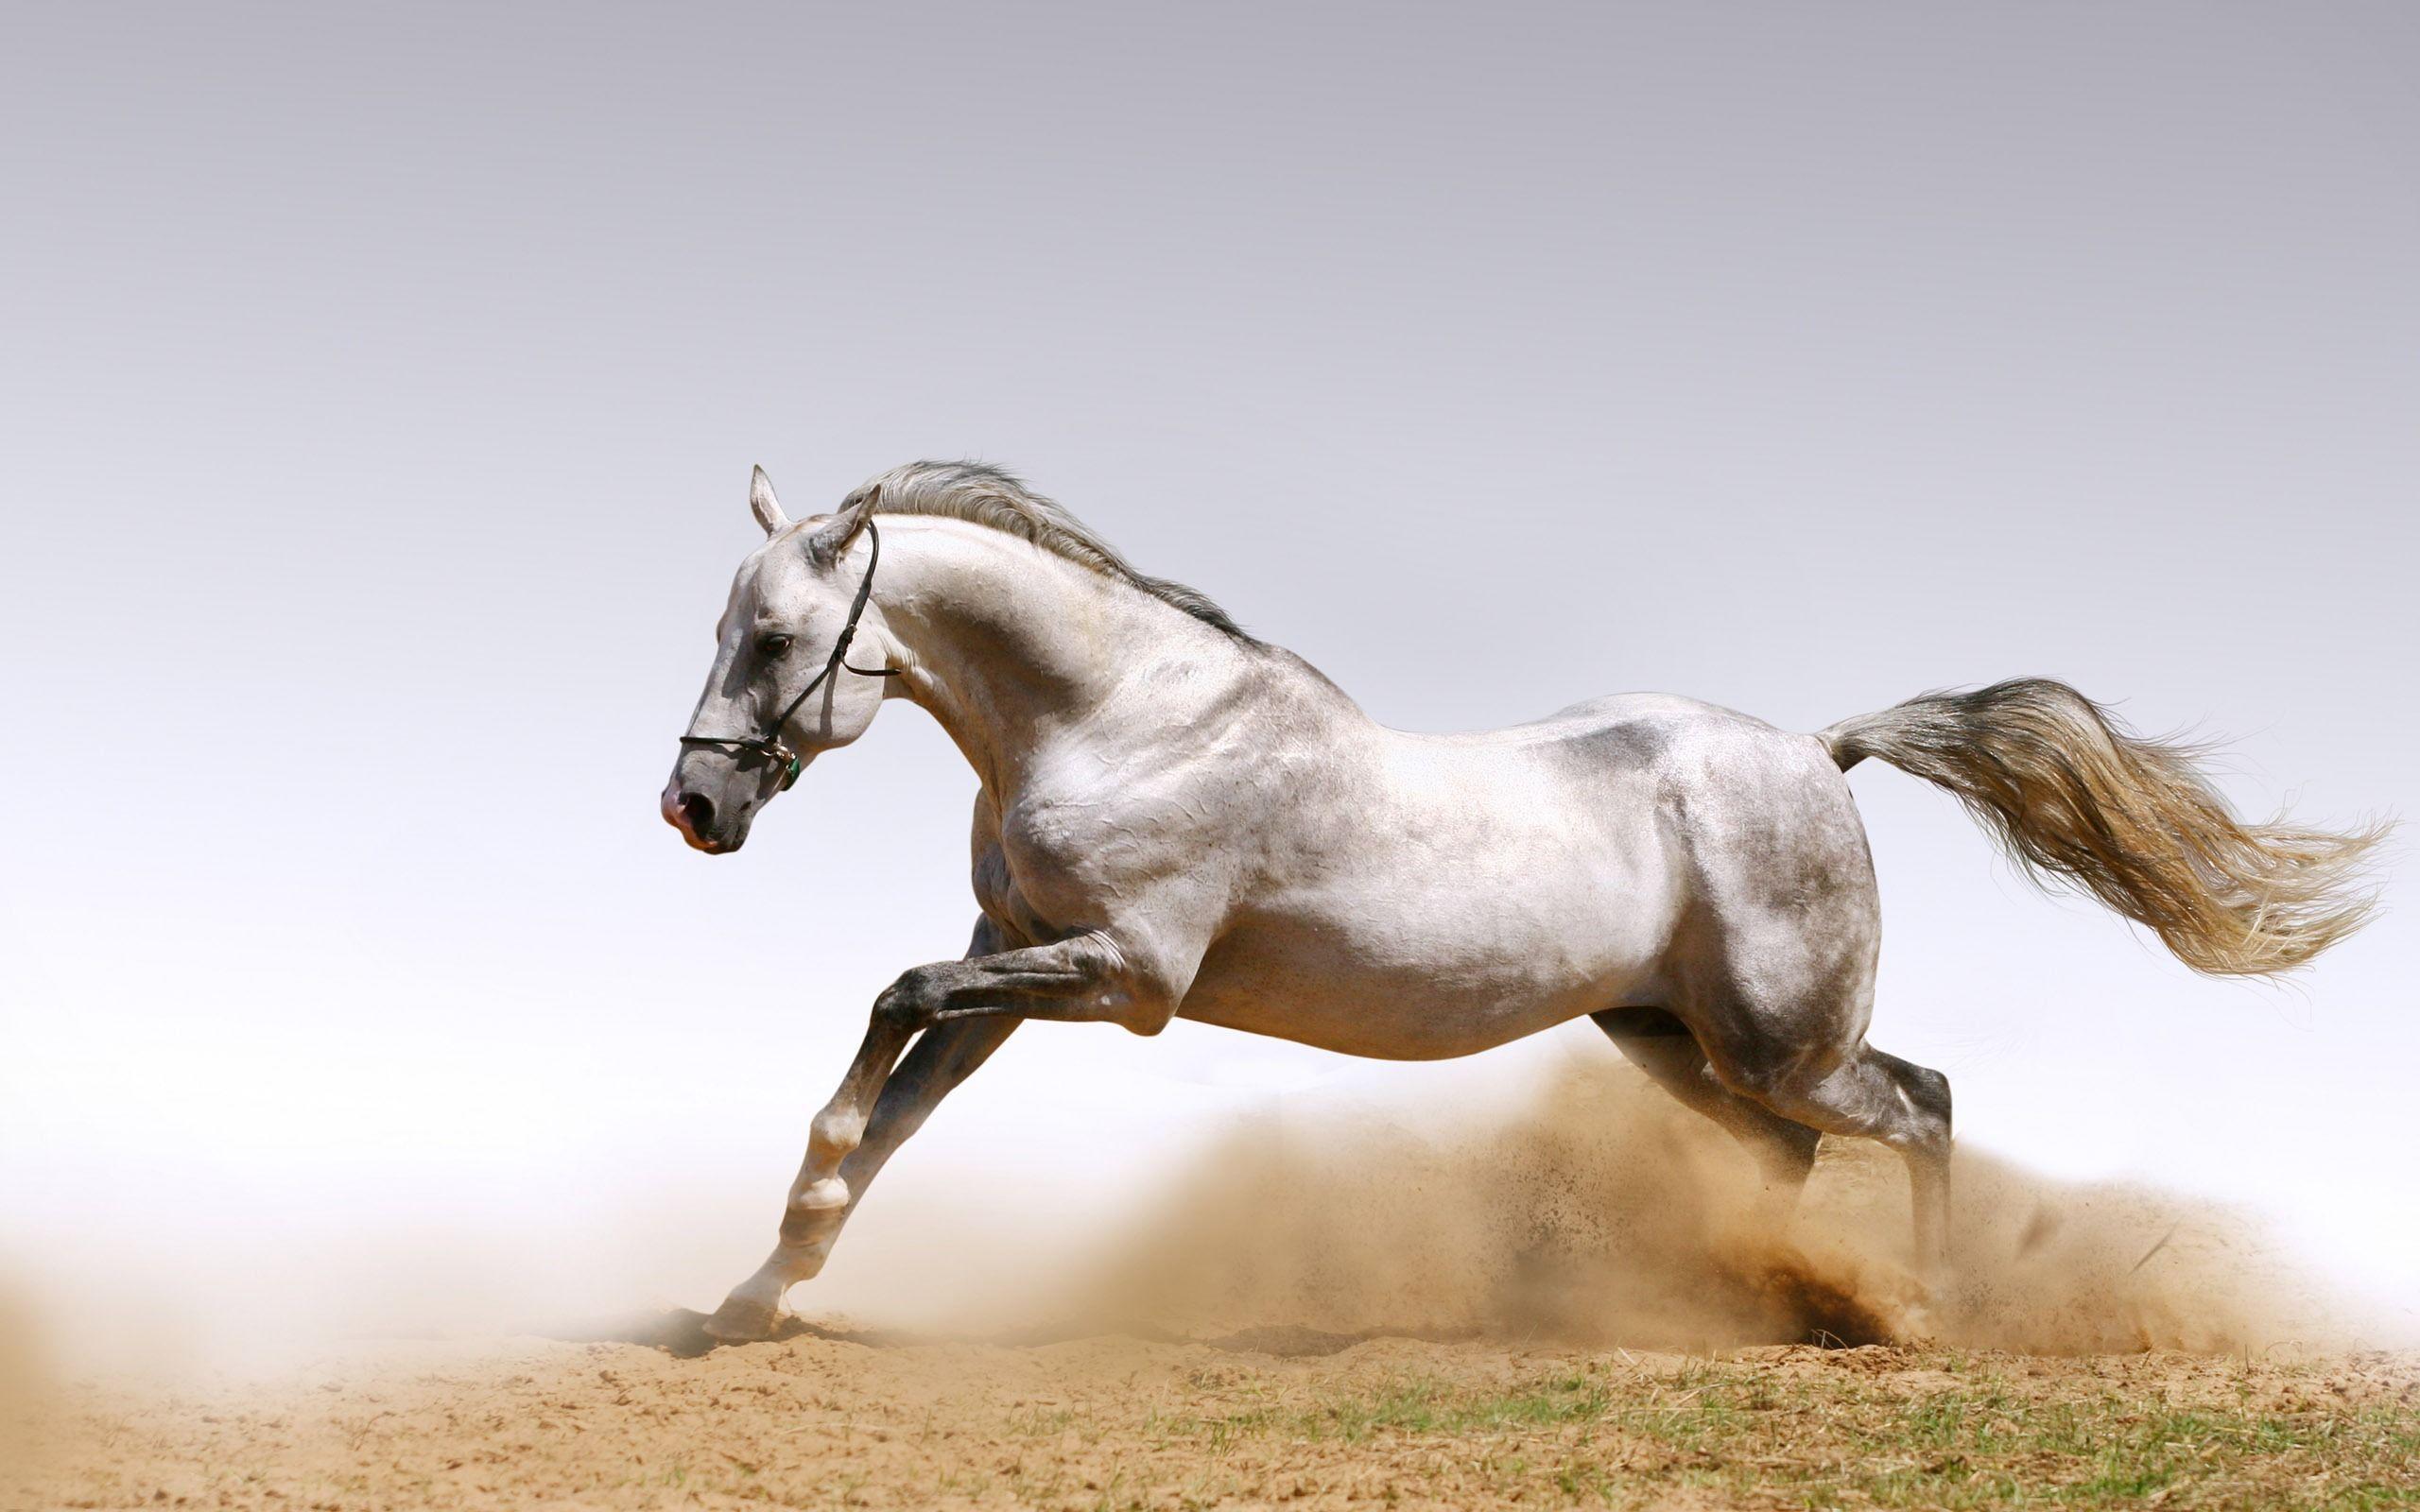 Horse Free Image Background Wallpaper. Cariwall